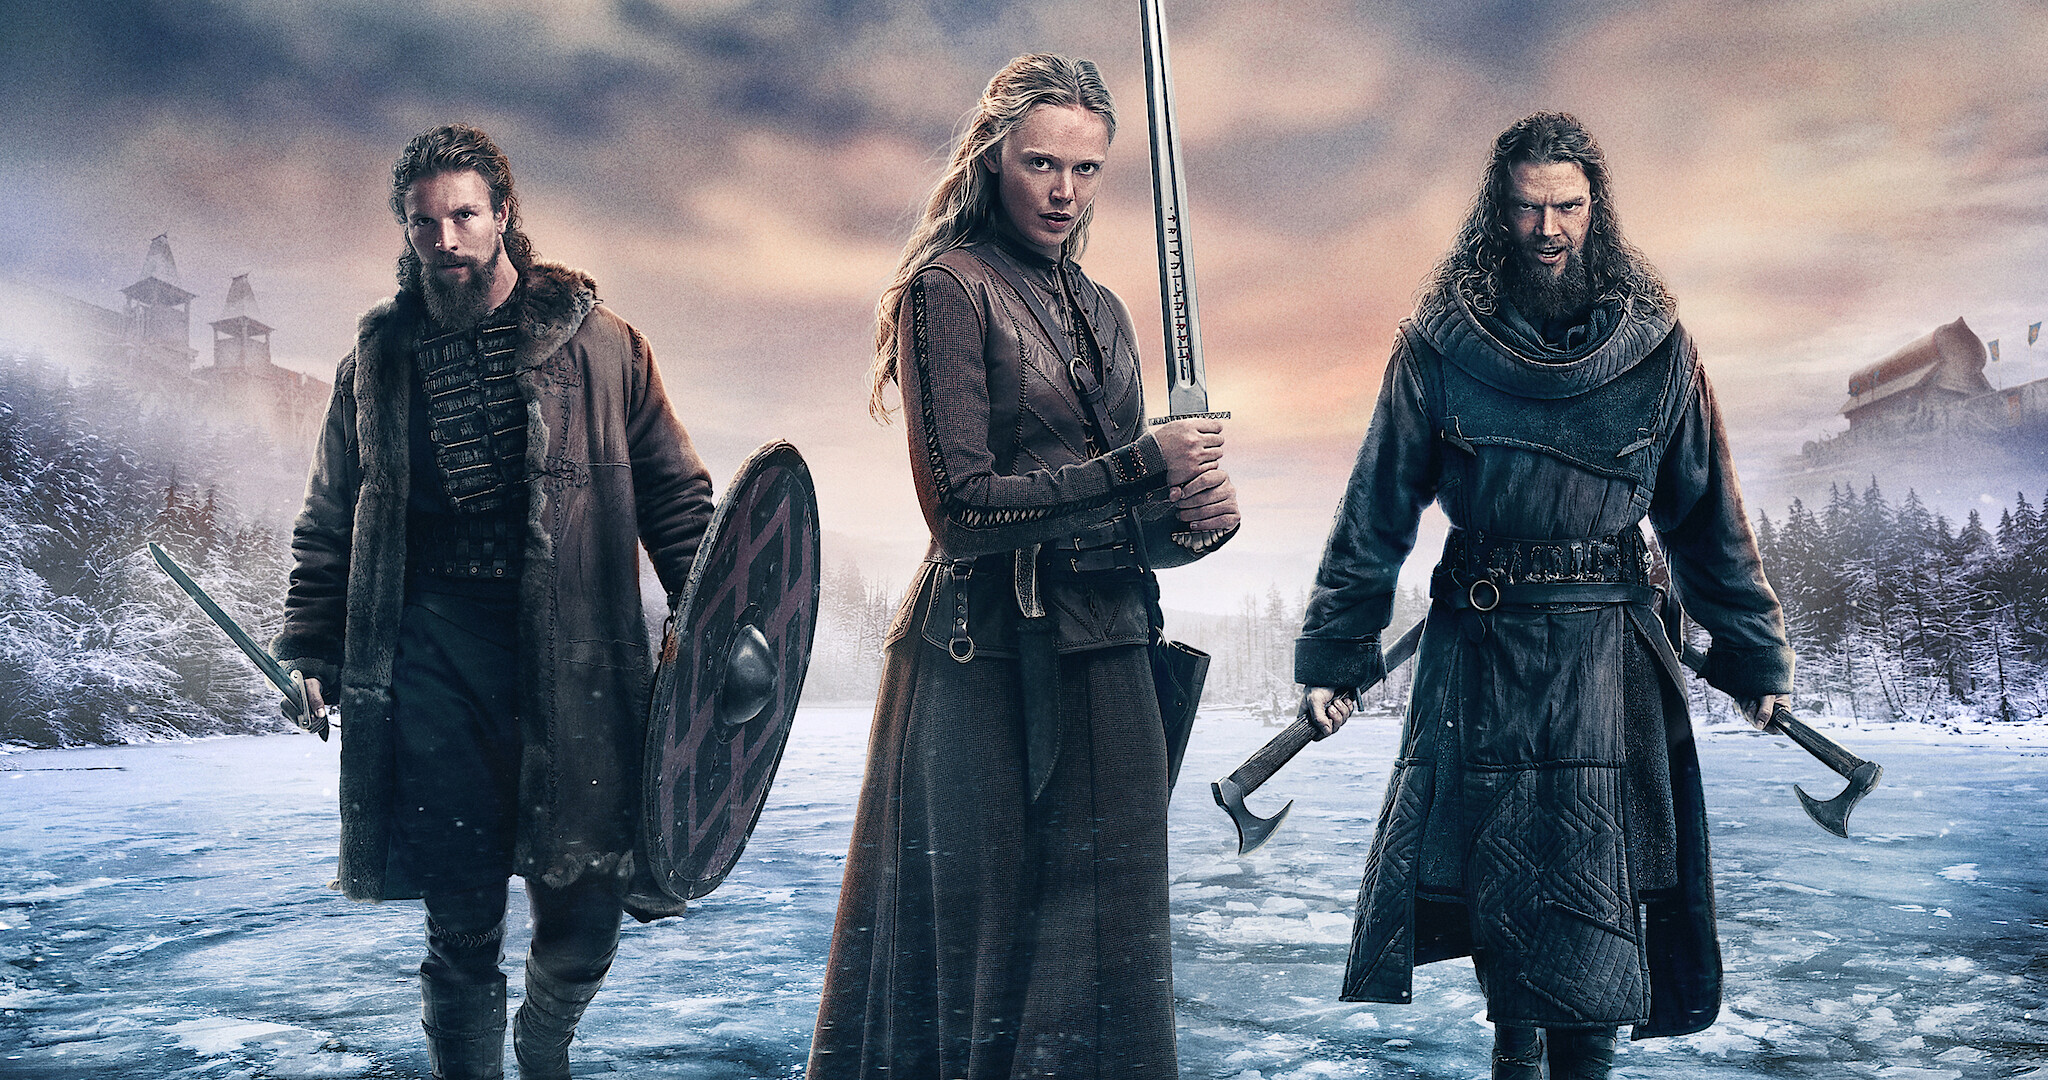 Vikings: Valhalla Cast, News, Videos and more